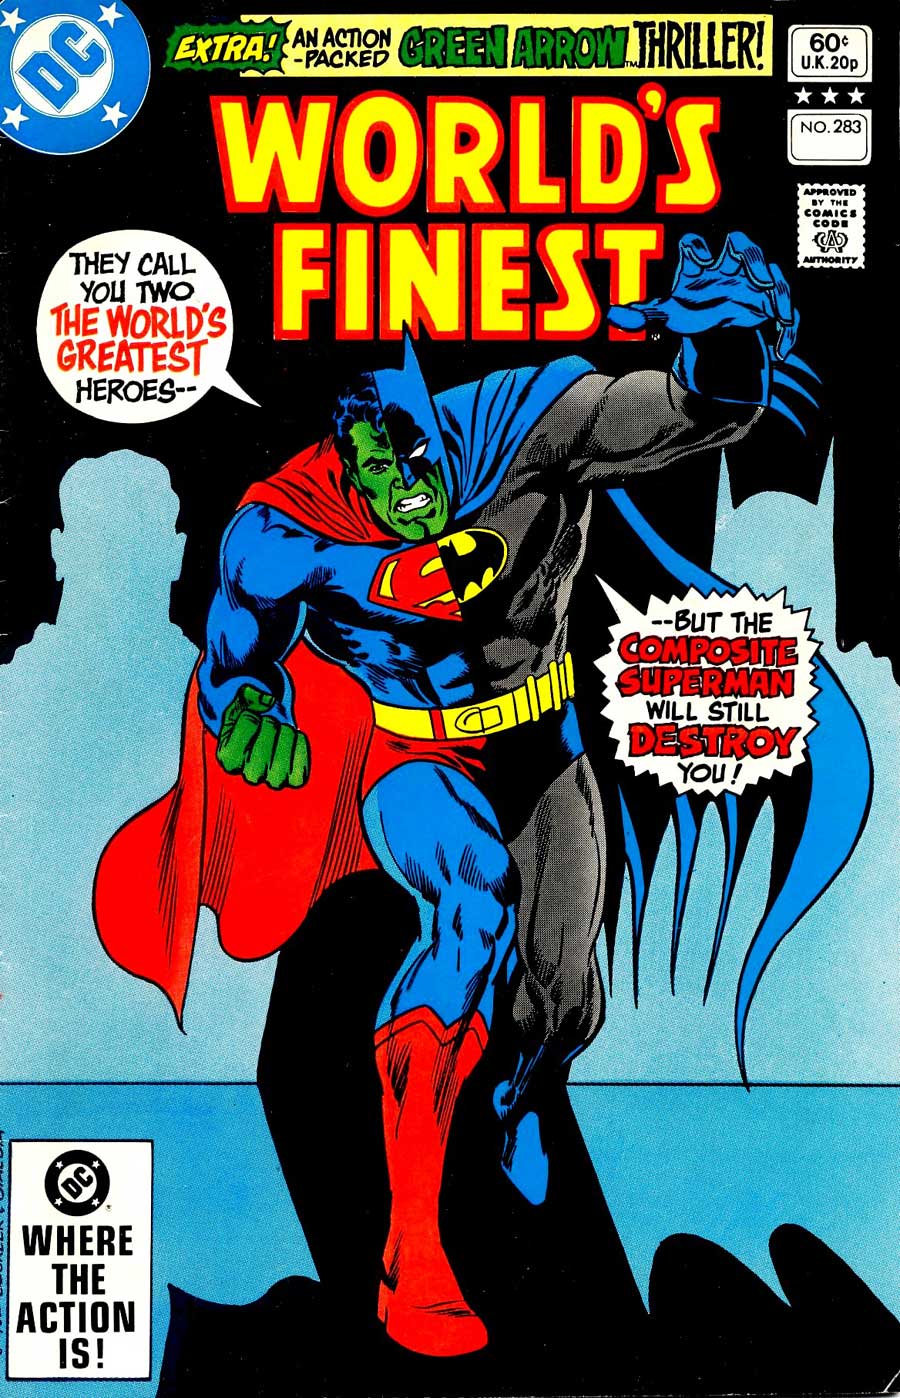 World’s Finest Comics #283 (September 1982) cover by Rich Buckler & Frank Giacoia